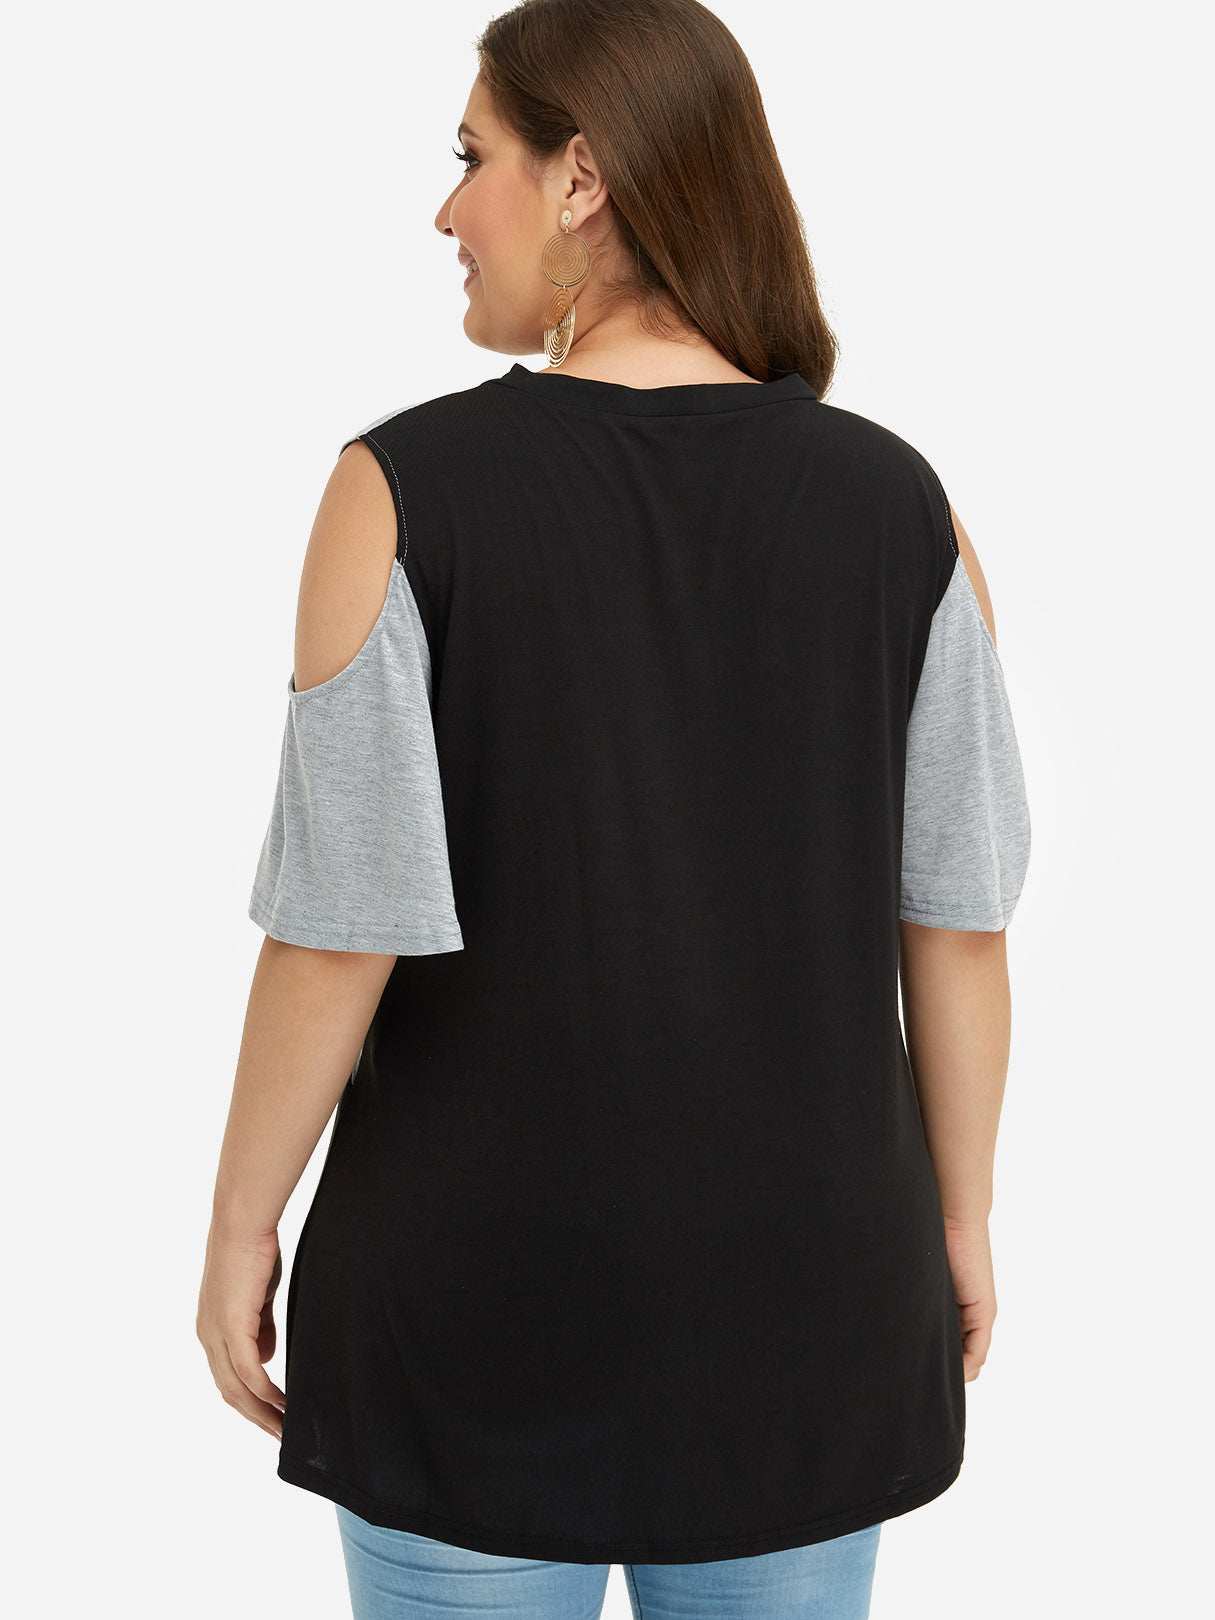 NEW FEELING Womens Color Block Plus Size Tops